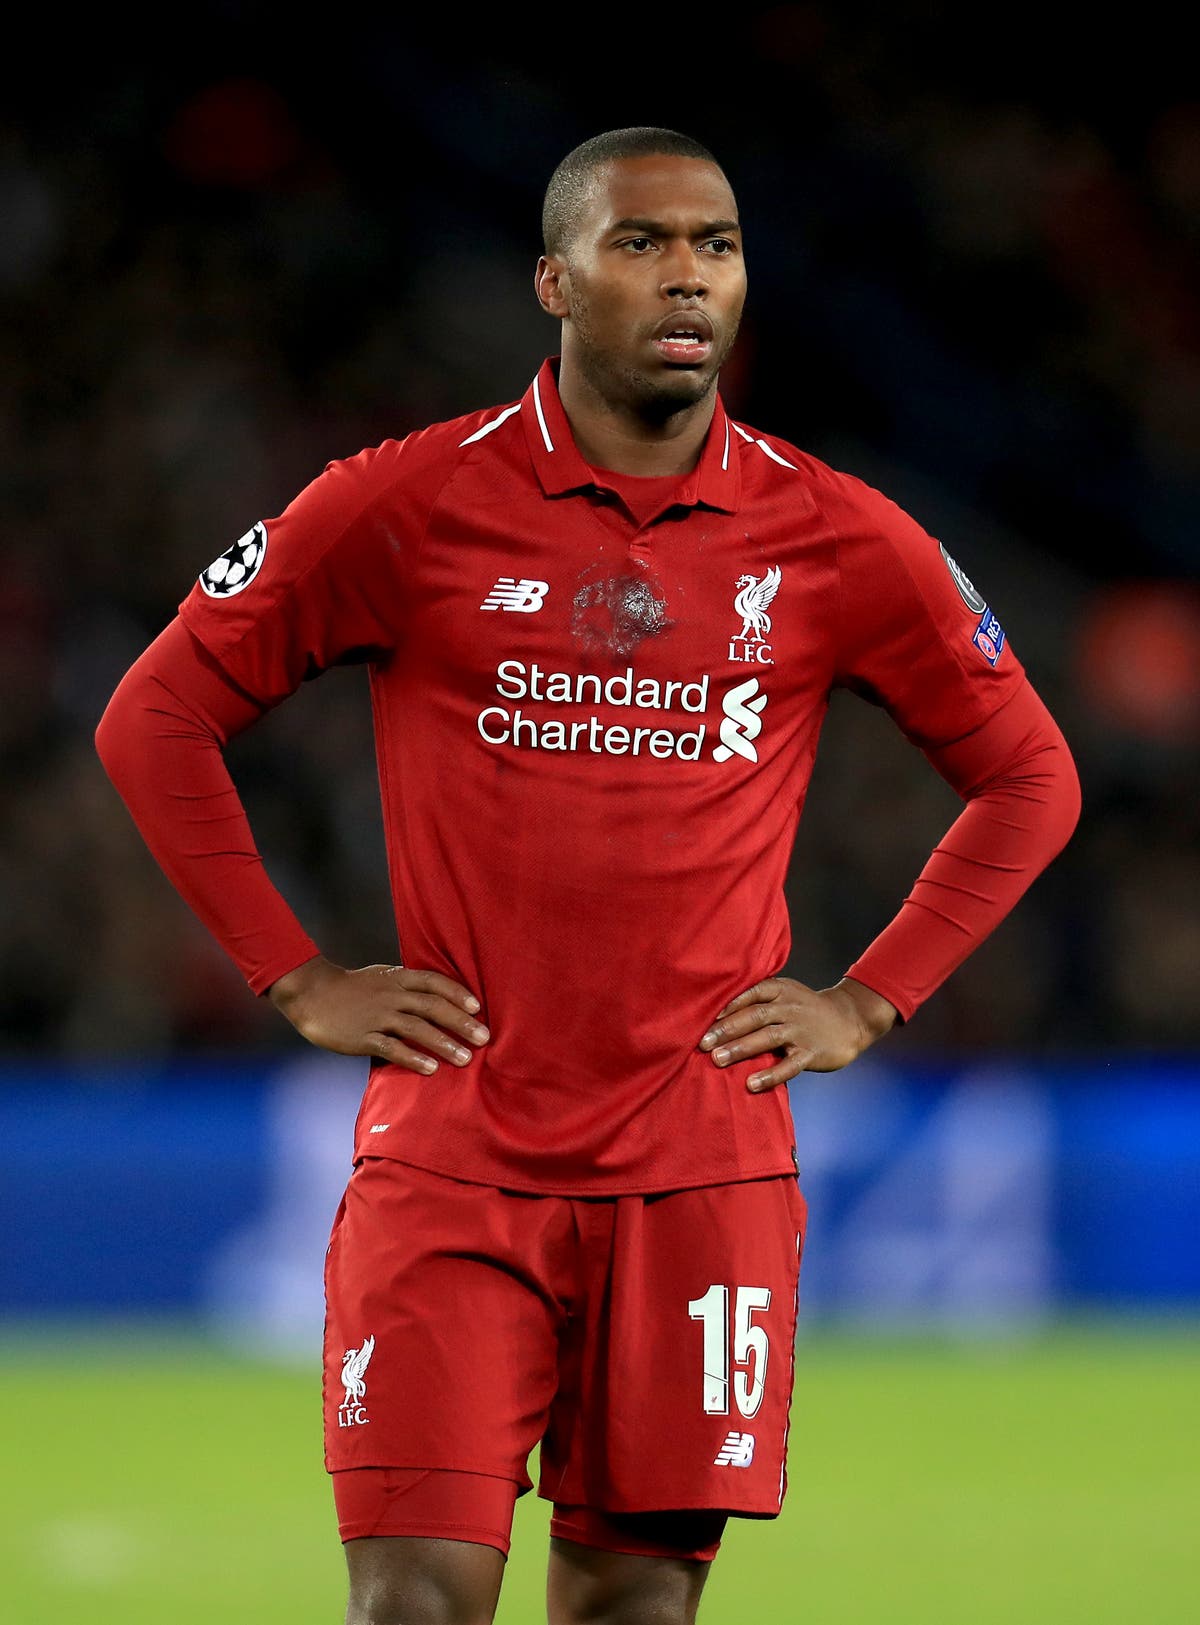 Footballer Daniel Sturridge ordered to pay £22,400 to man who found his lost dog